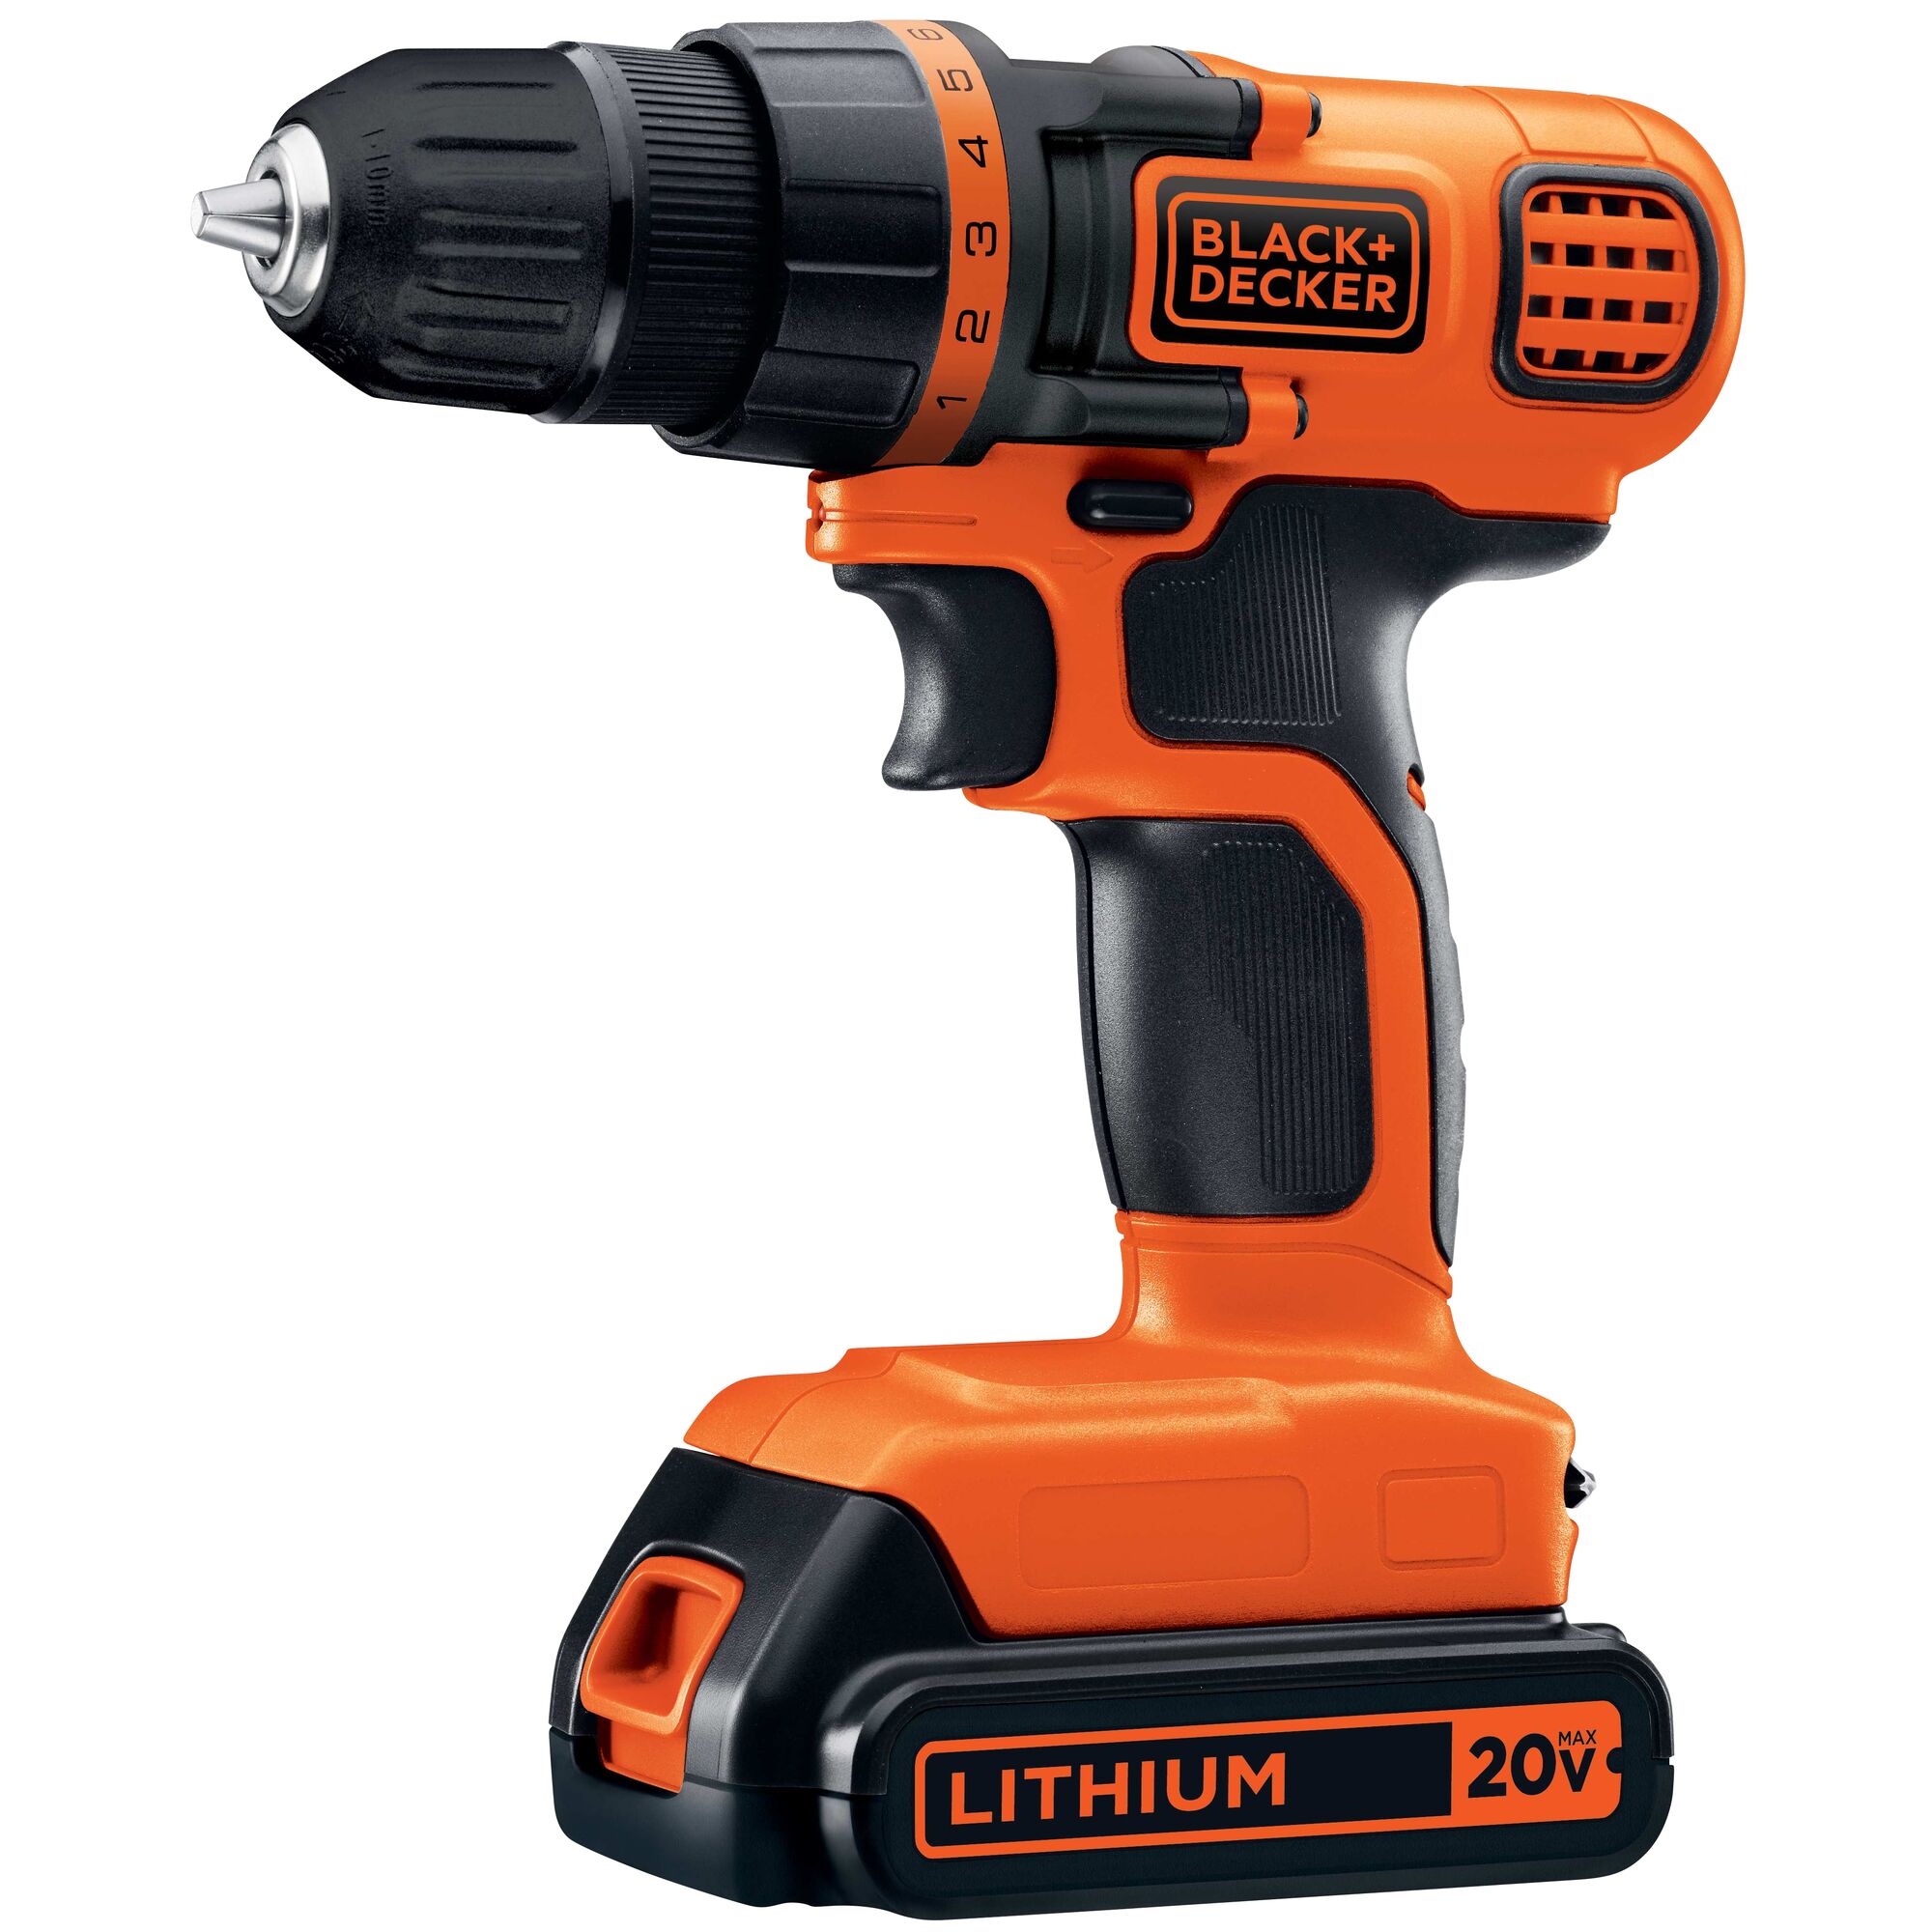 Hero shot of the cordless drill with head of drill pointed to the left